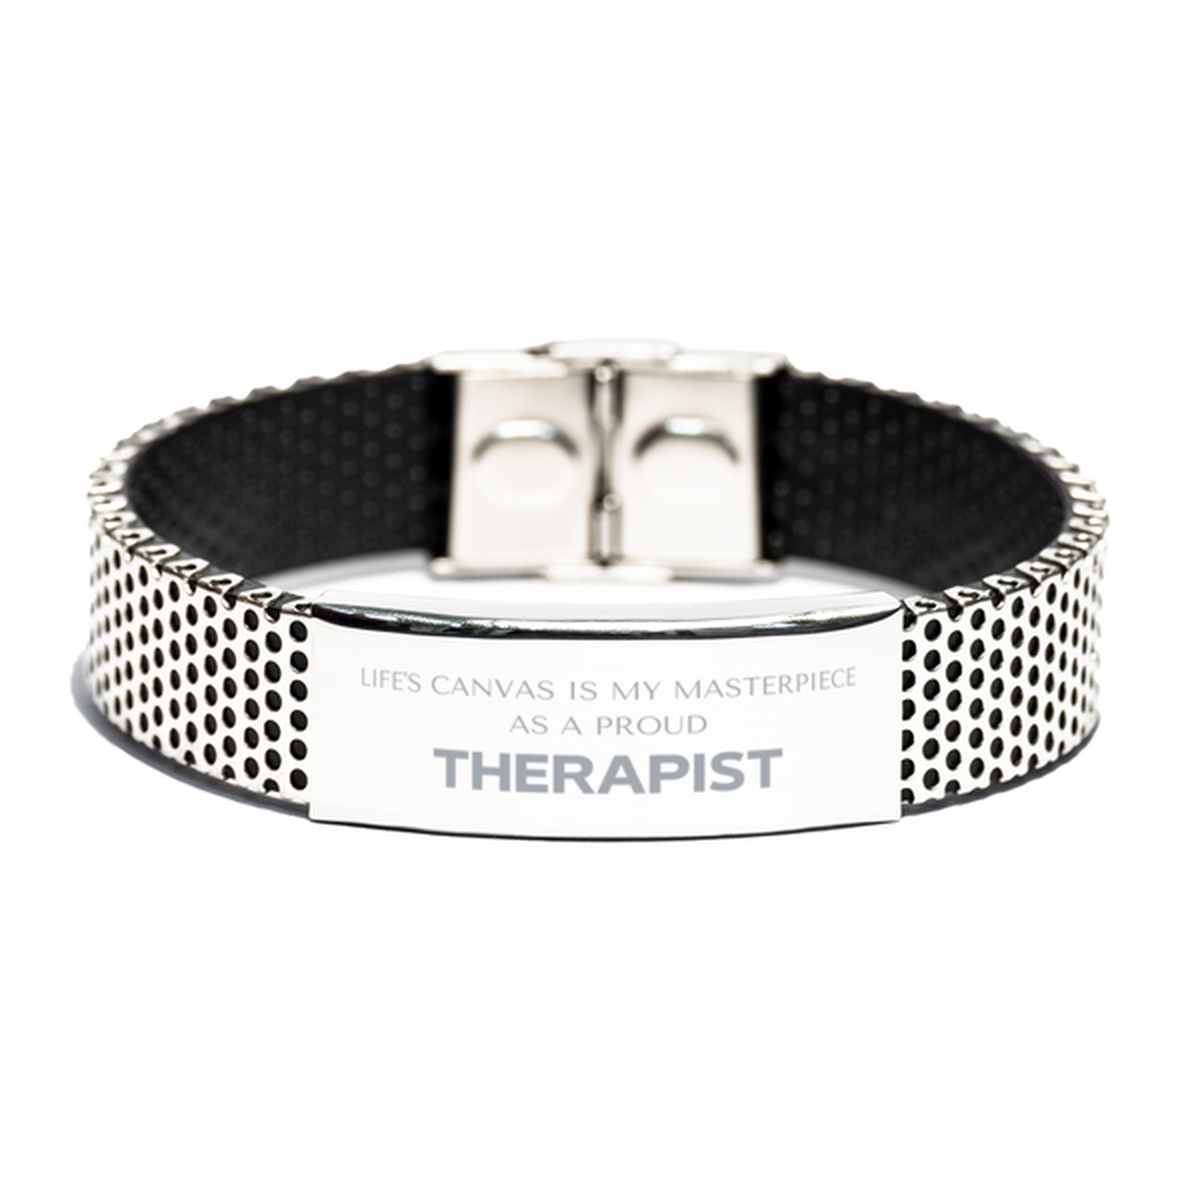 Proud Therapist Gifts, Life's canvas is my masterpiece, Epic Birthday Christmas Unique Stainless Steel Bracelet For Therapist, Coworkers, Men, Women, Friends